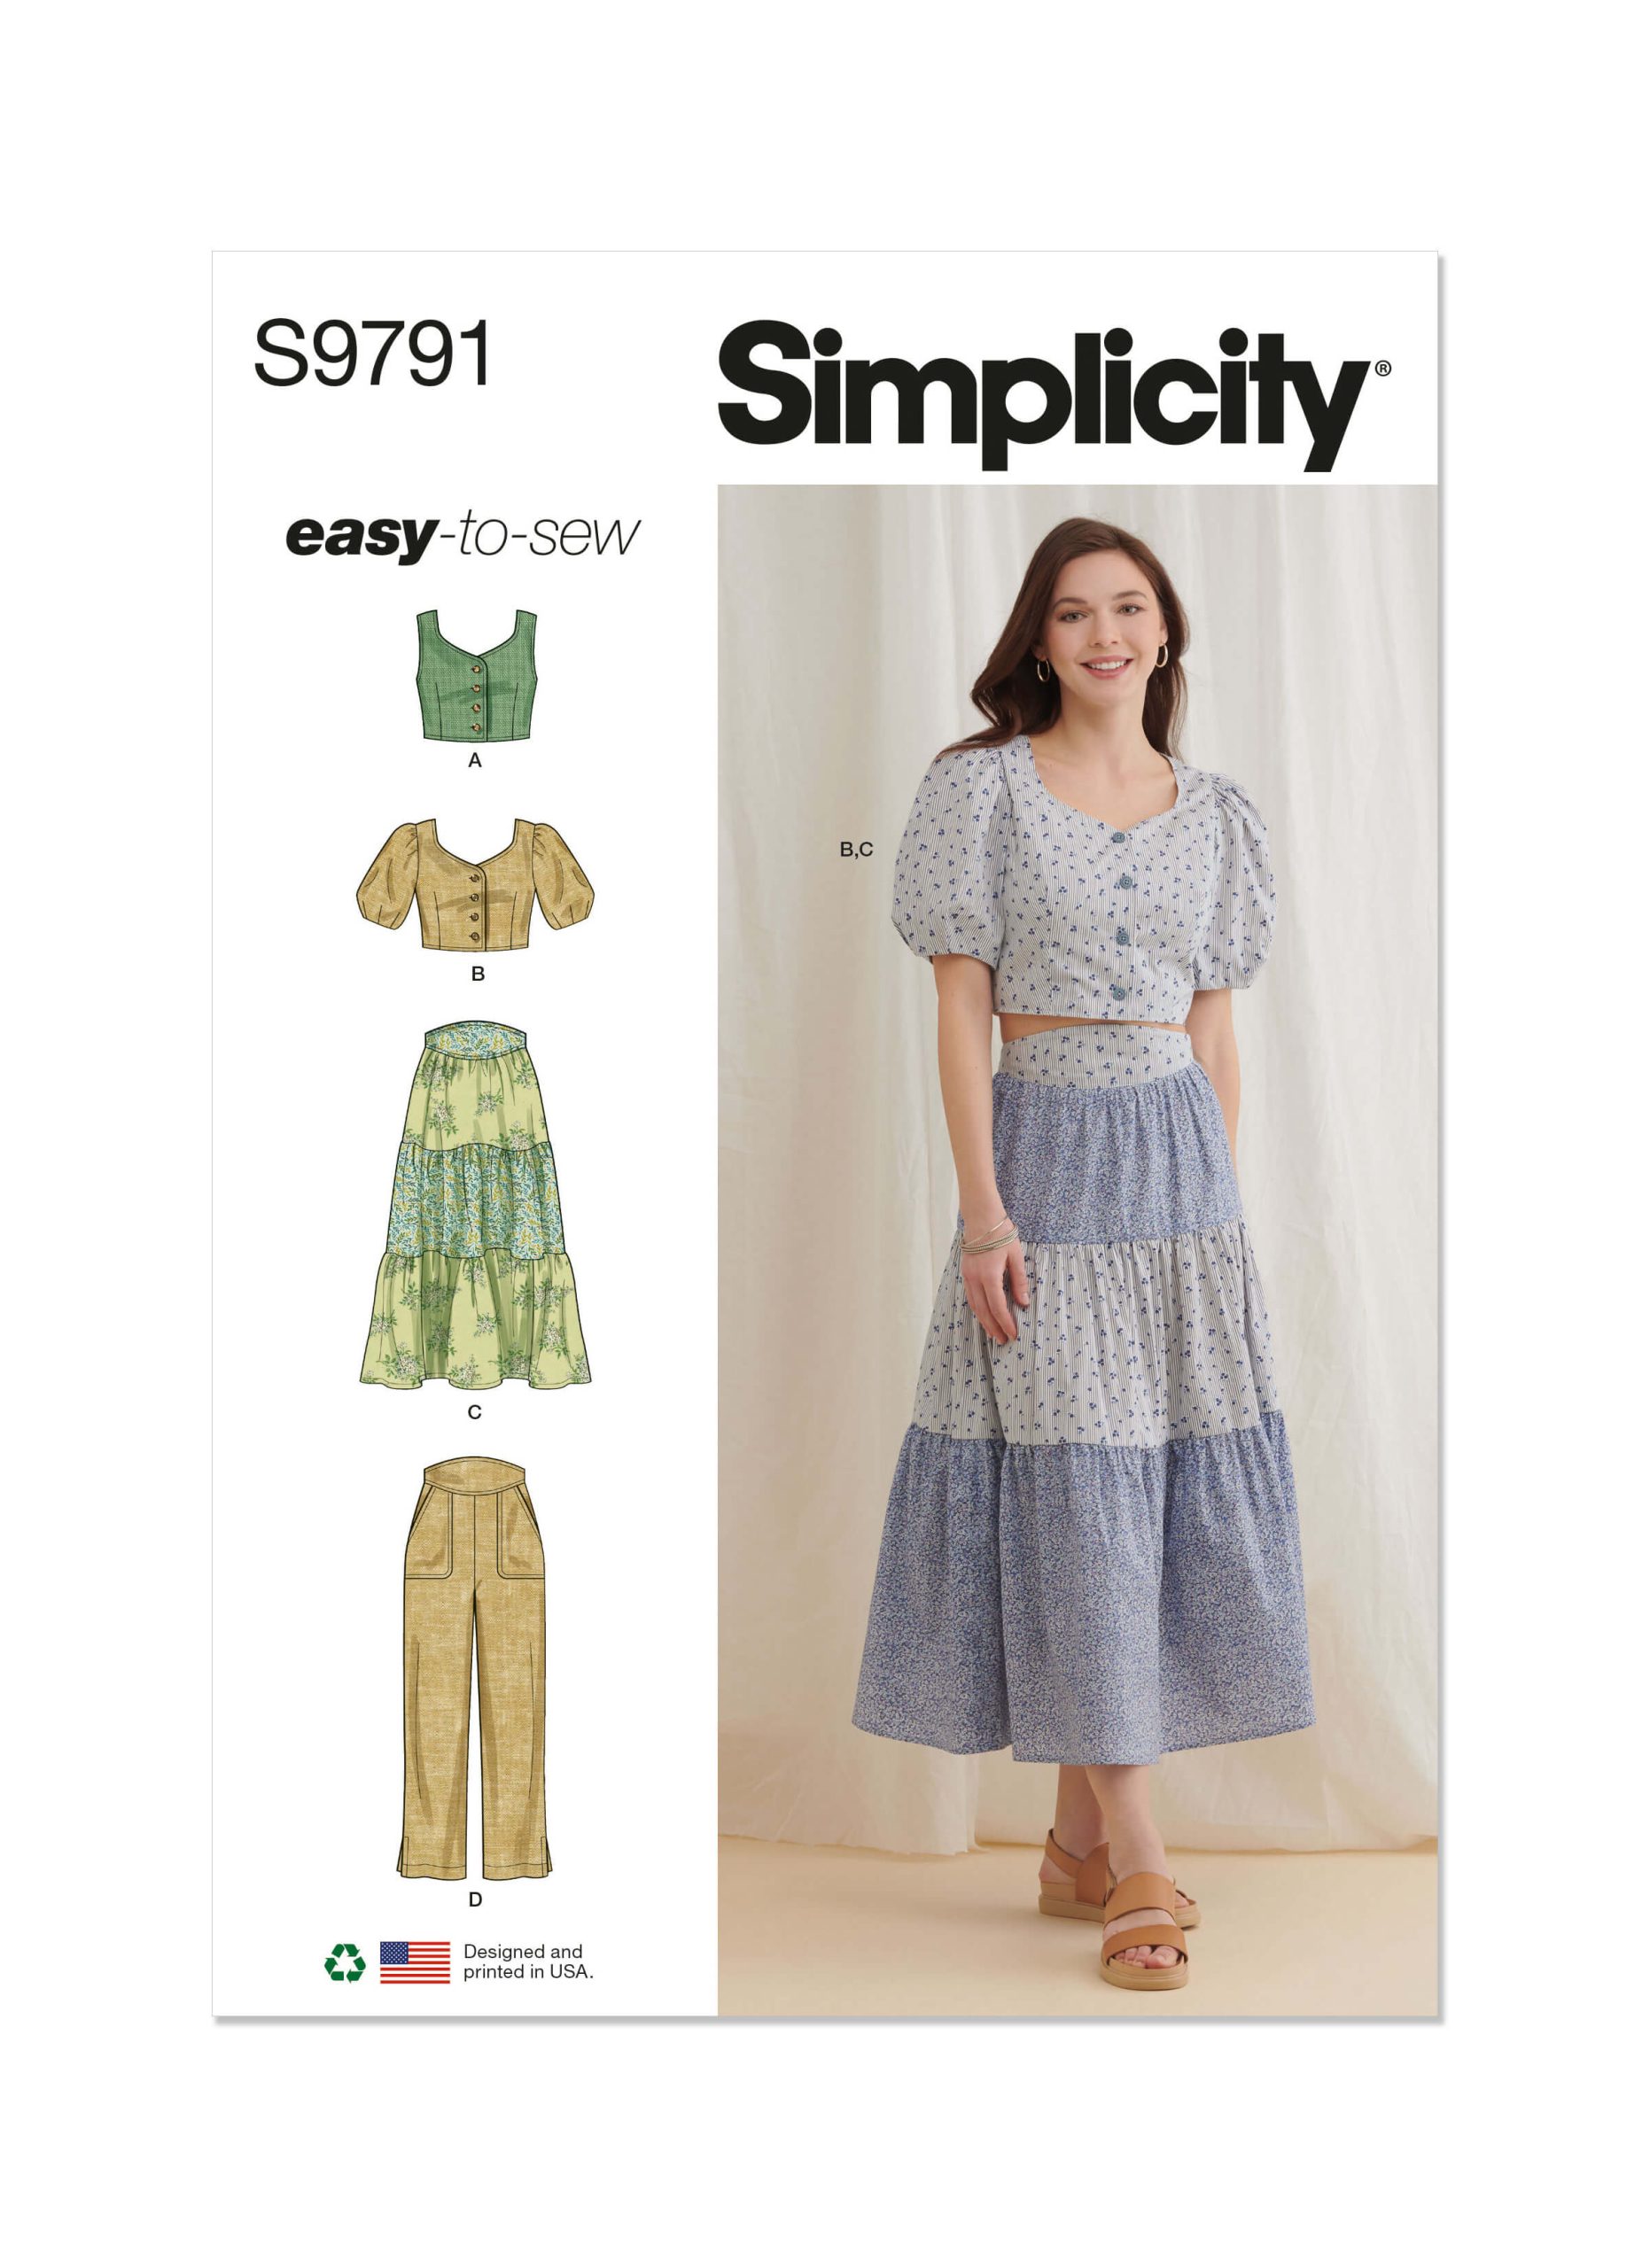 Simplicity Sewing Pattern S9791 Misses' Tops, Skirt and Trousers